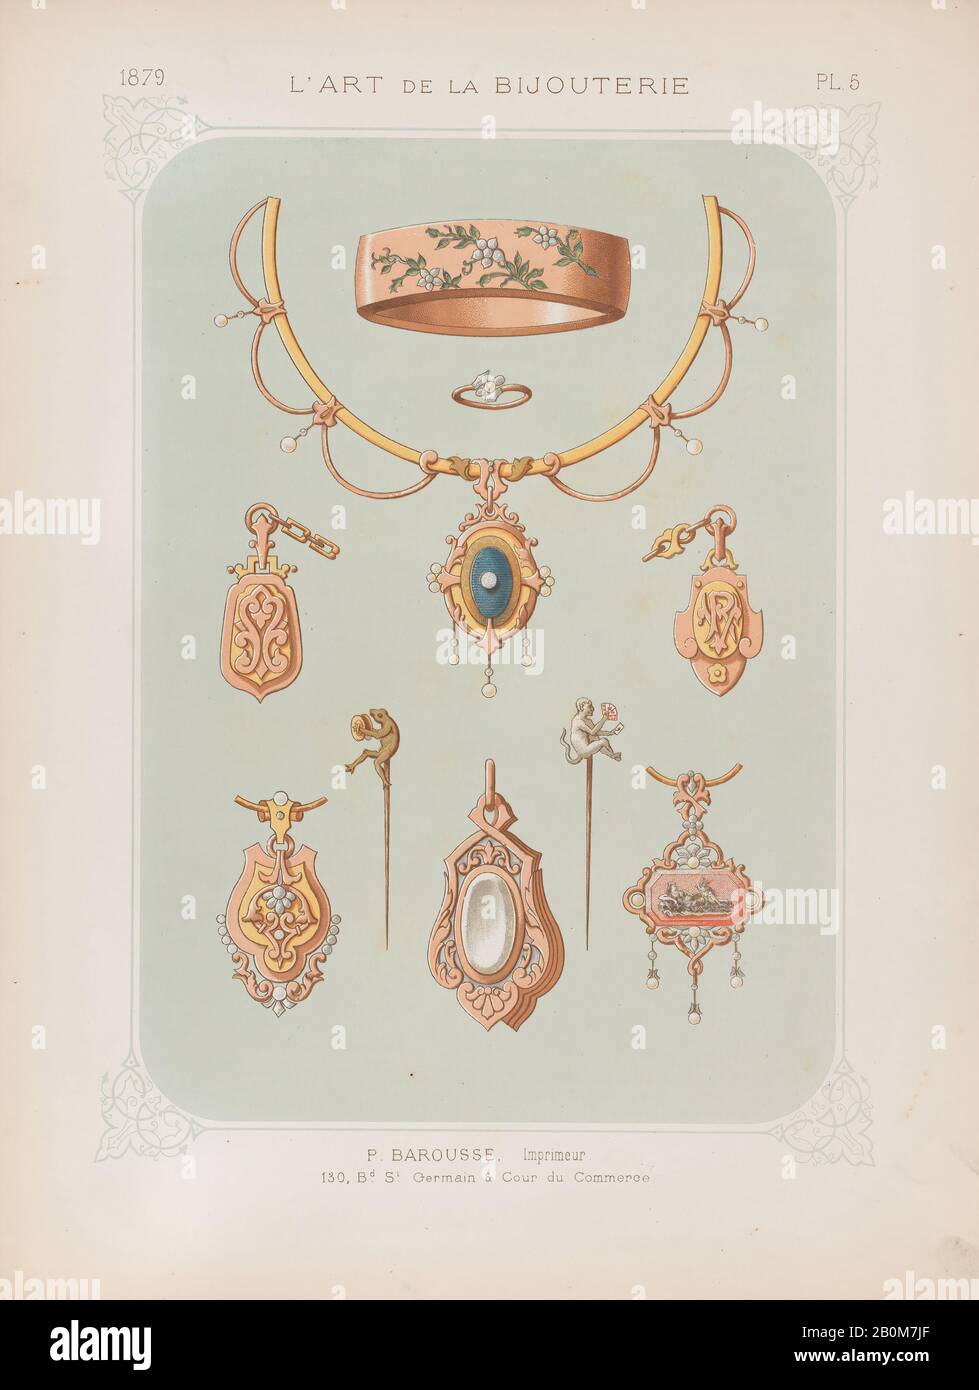 Jean Francois Barousse, Jewelry Designs in Gold and Rose Gold, Plate 5 from 'L'Art de la Bijouterie', 1879, color lithograph, Sheet: 14 1/4 × 10 13/16 in. (36.2 × 27.5 cm Stock Photo